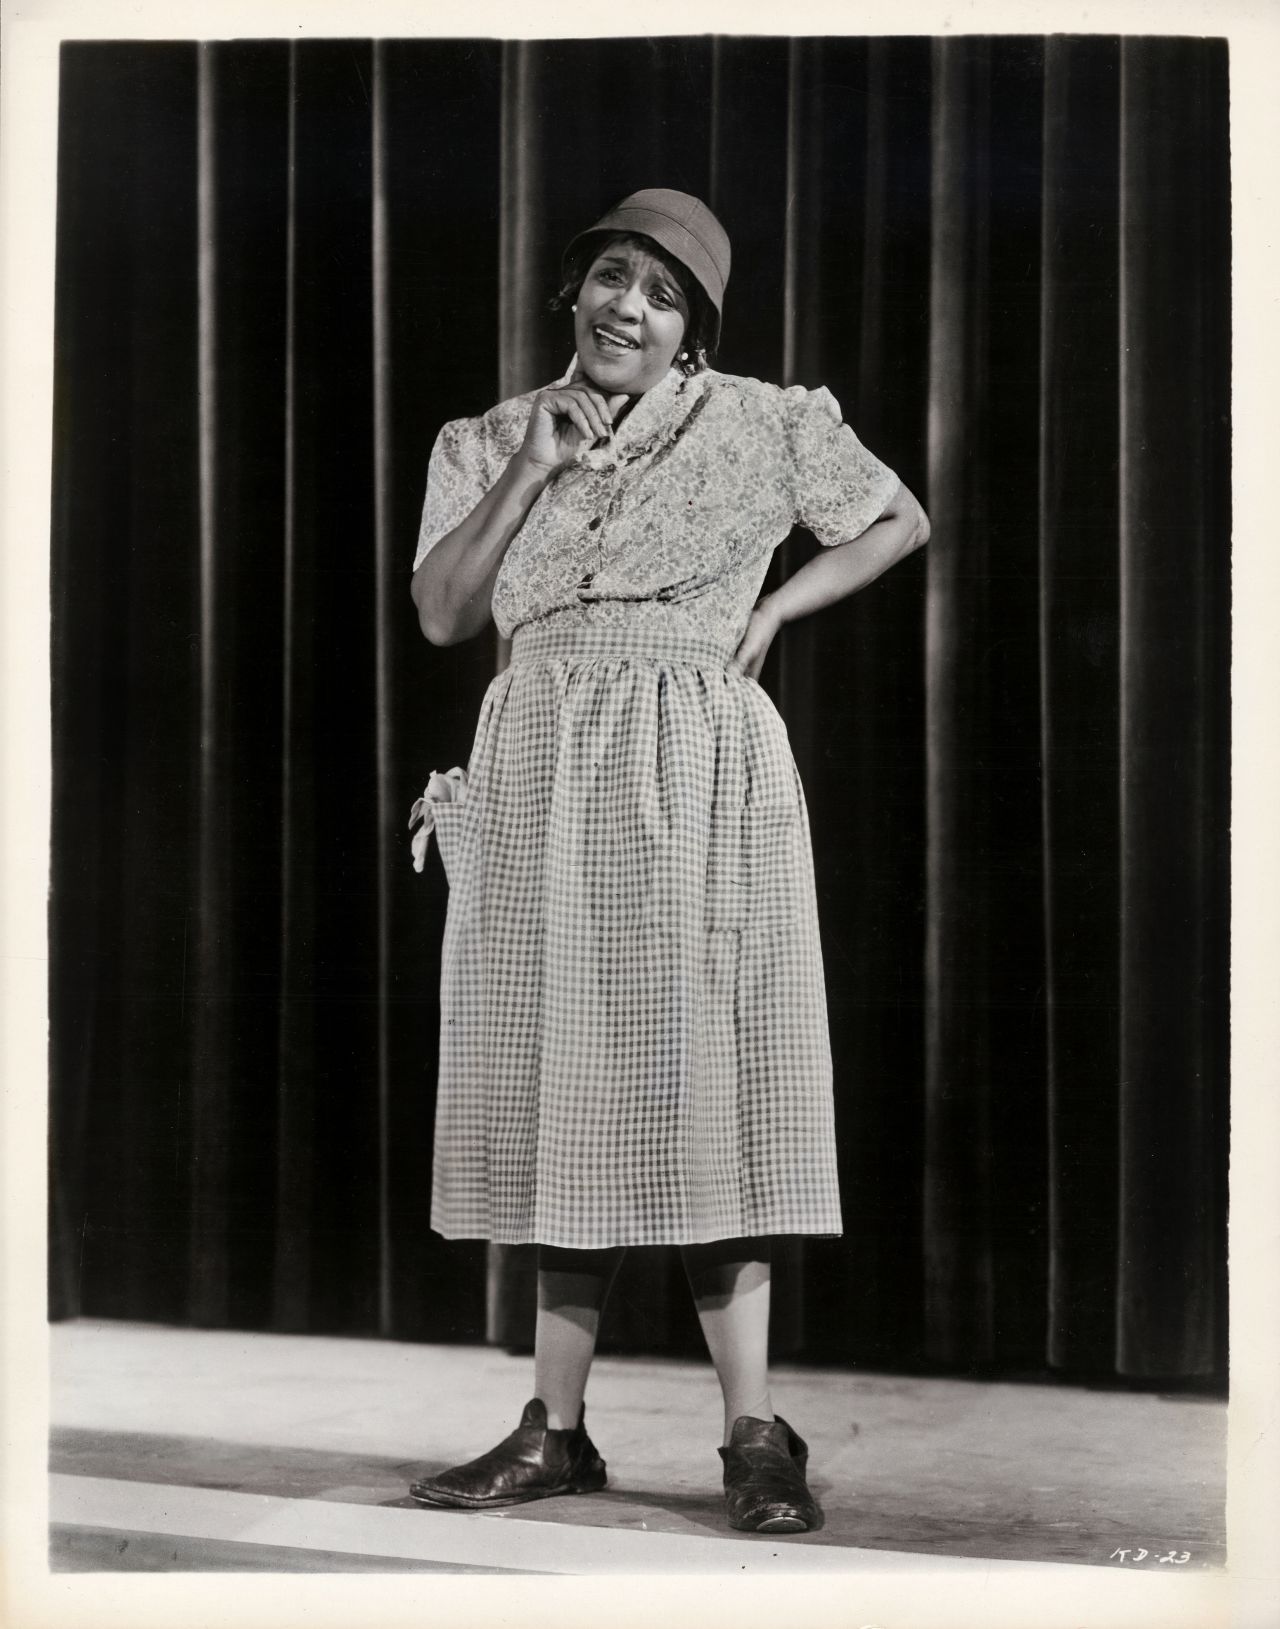 Considering the early trials Jackie "Moms" Mabley had to overcome, her enduring and groundbreaking career in comedy is all the more impressive. After starting off in vaudeville in 1920s New York, she expanded to the silver screen and became the first female comedian to perform at the Apollo Theater. Before Phyllis Diller put on her fright wig and sack dress, Mabley was making audiences double over with her bawdy sense of humor that included frank talk about race. Mabley's talent wasn't widely recognized until the '60s; she died in 1975. 